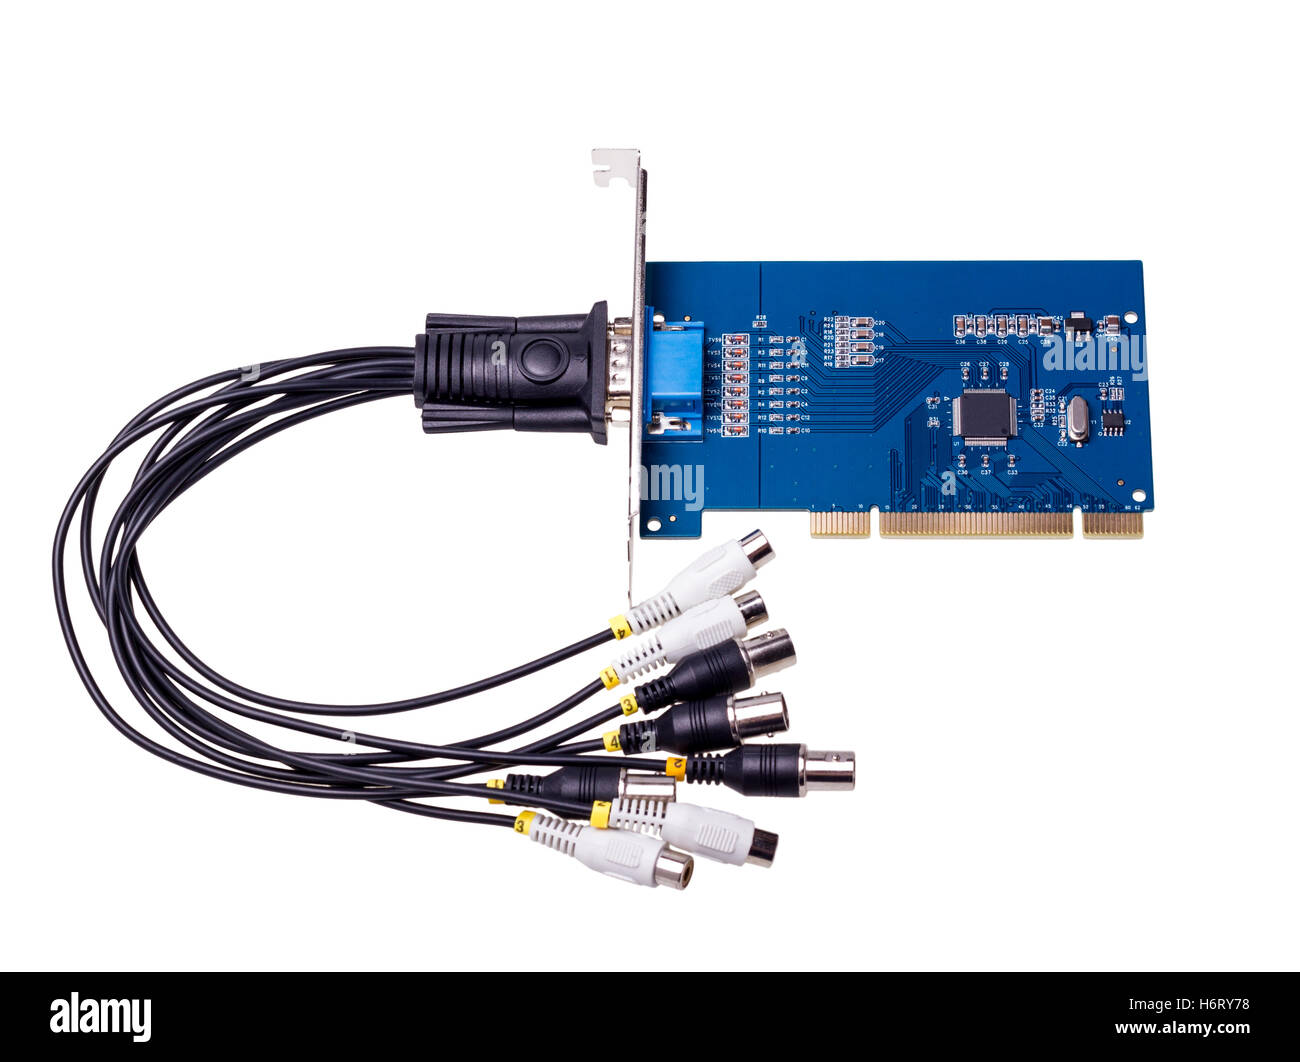 Computer video capture card isolated on white background Stock Photo